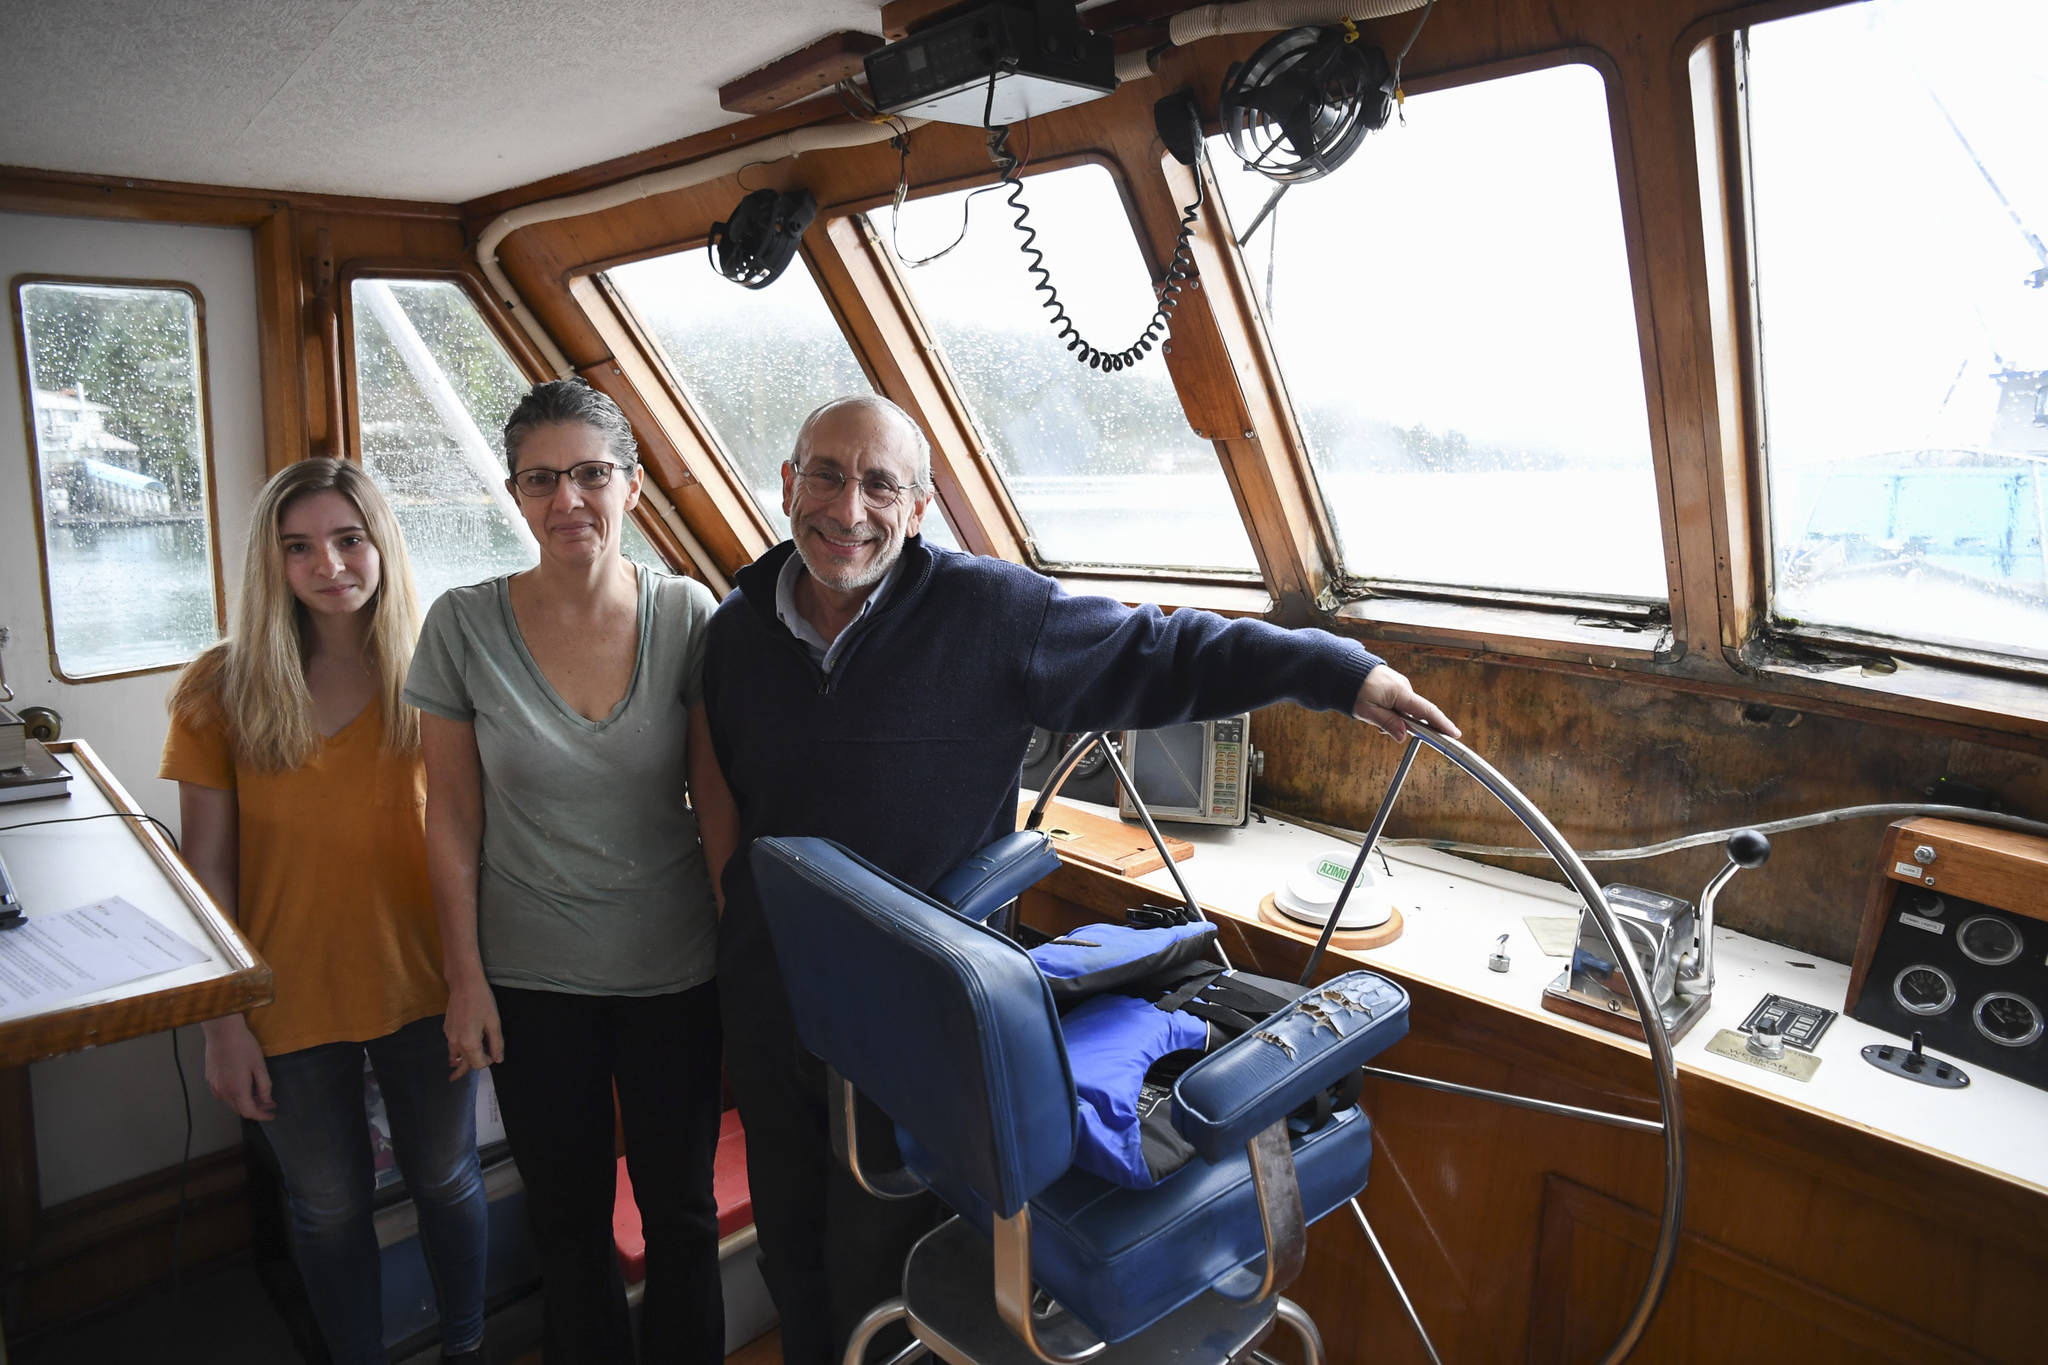 Rabbi Yehoshua Mizrachi, his partner Sheila McNamee and her daughter, Helena, 19, aboard their newly bought custom built 52-foot troller, the M/V Sephina, in the Don D. Statter Memorial Boat Harbor in Auke Bay on Wednesday, Nov. 13, 2019. Learn more by watching the video below. (Michael Penn | Juneau Empire)